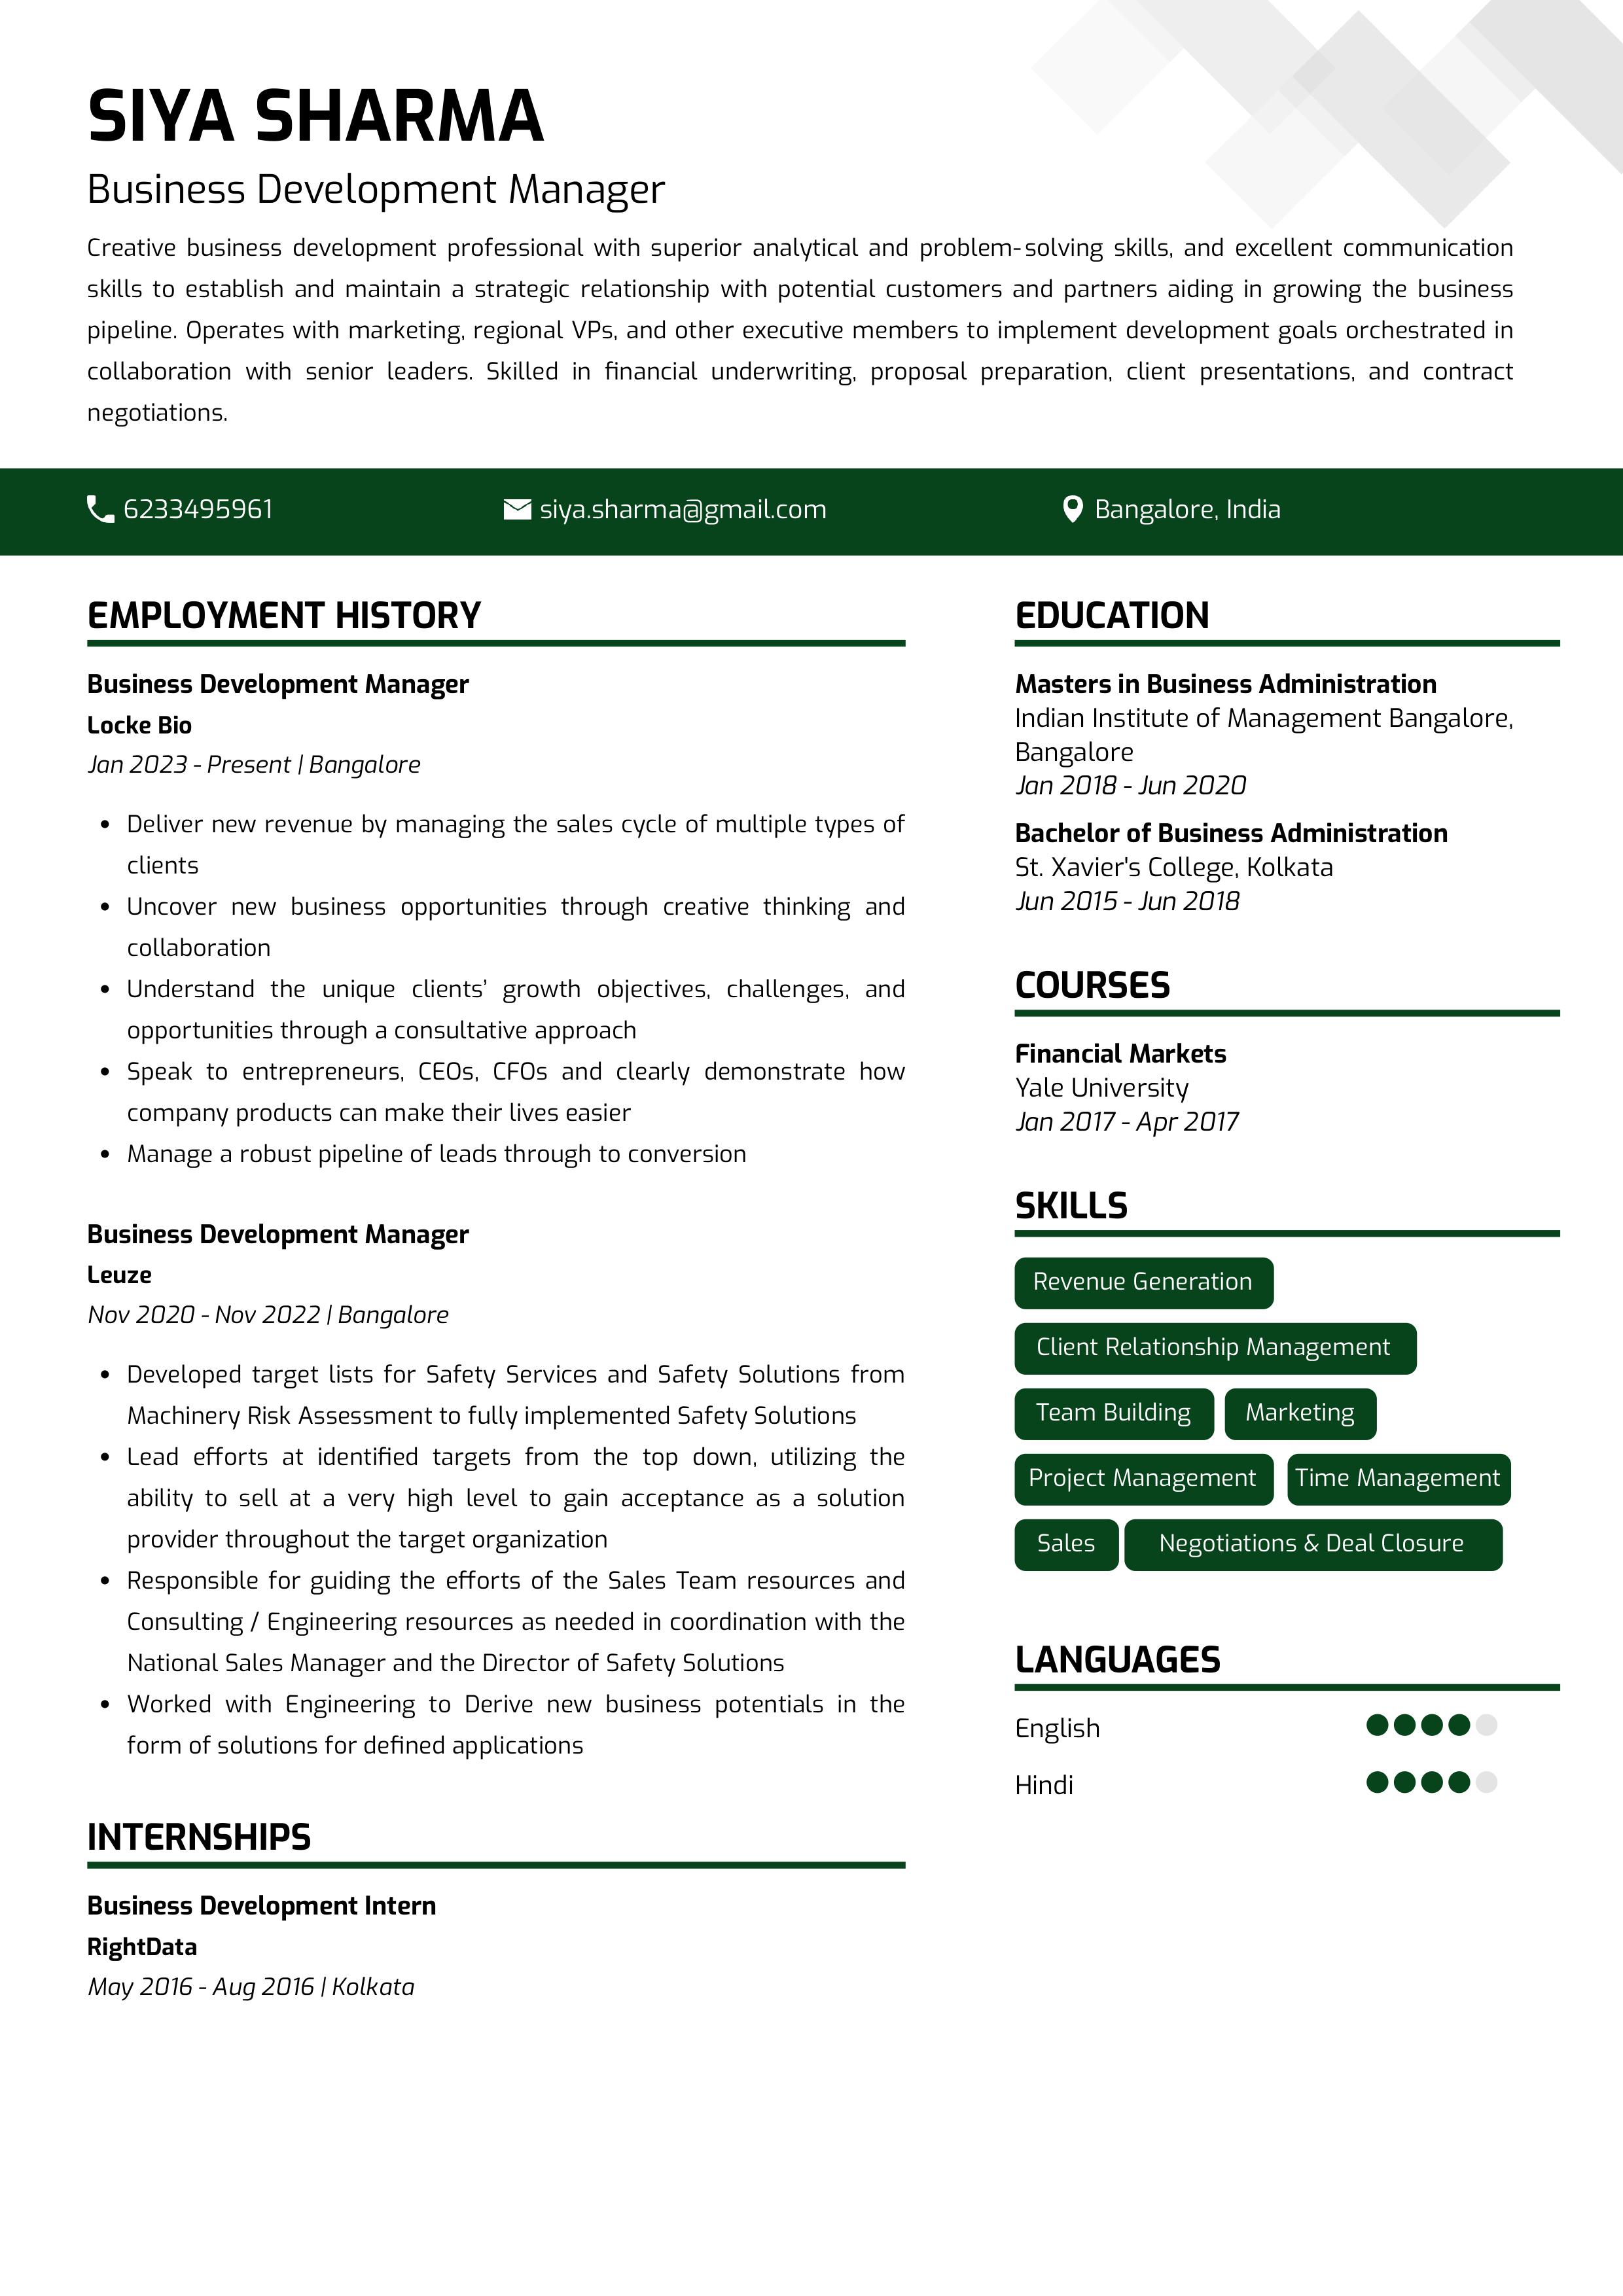 Resume of Business Development Manager